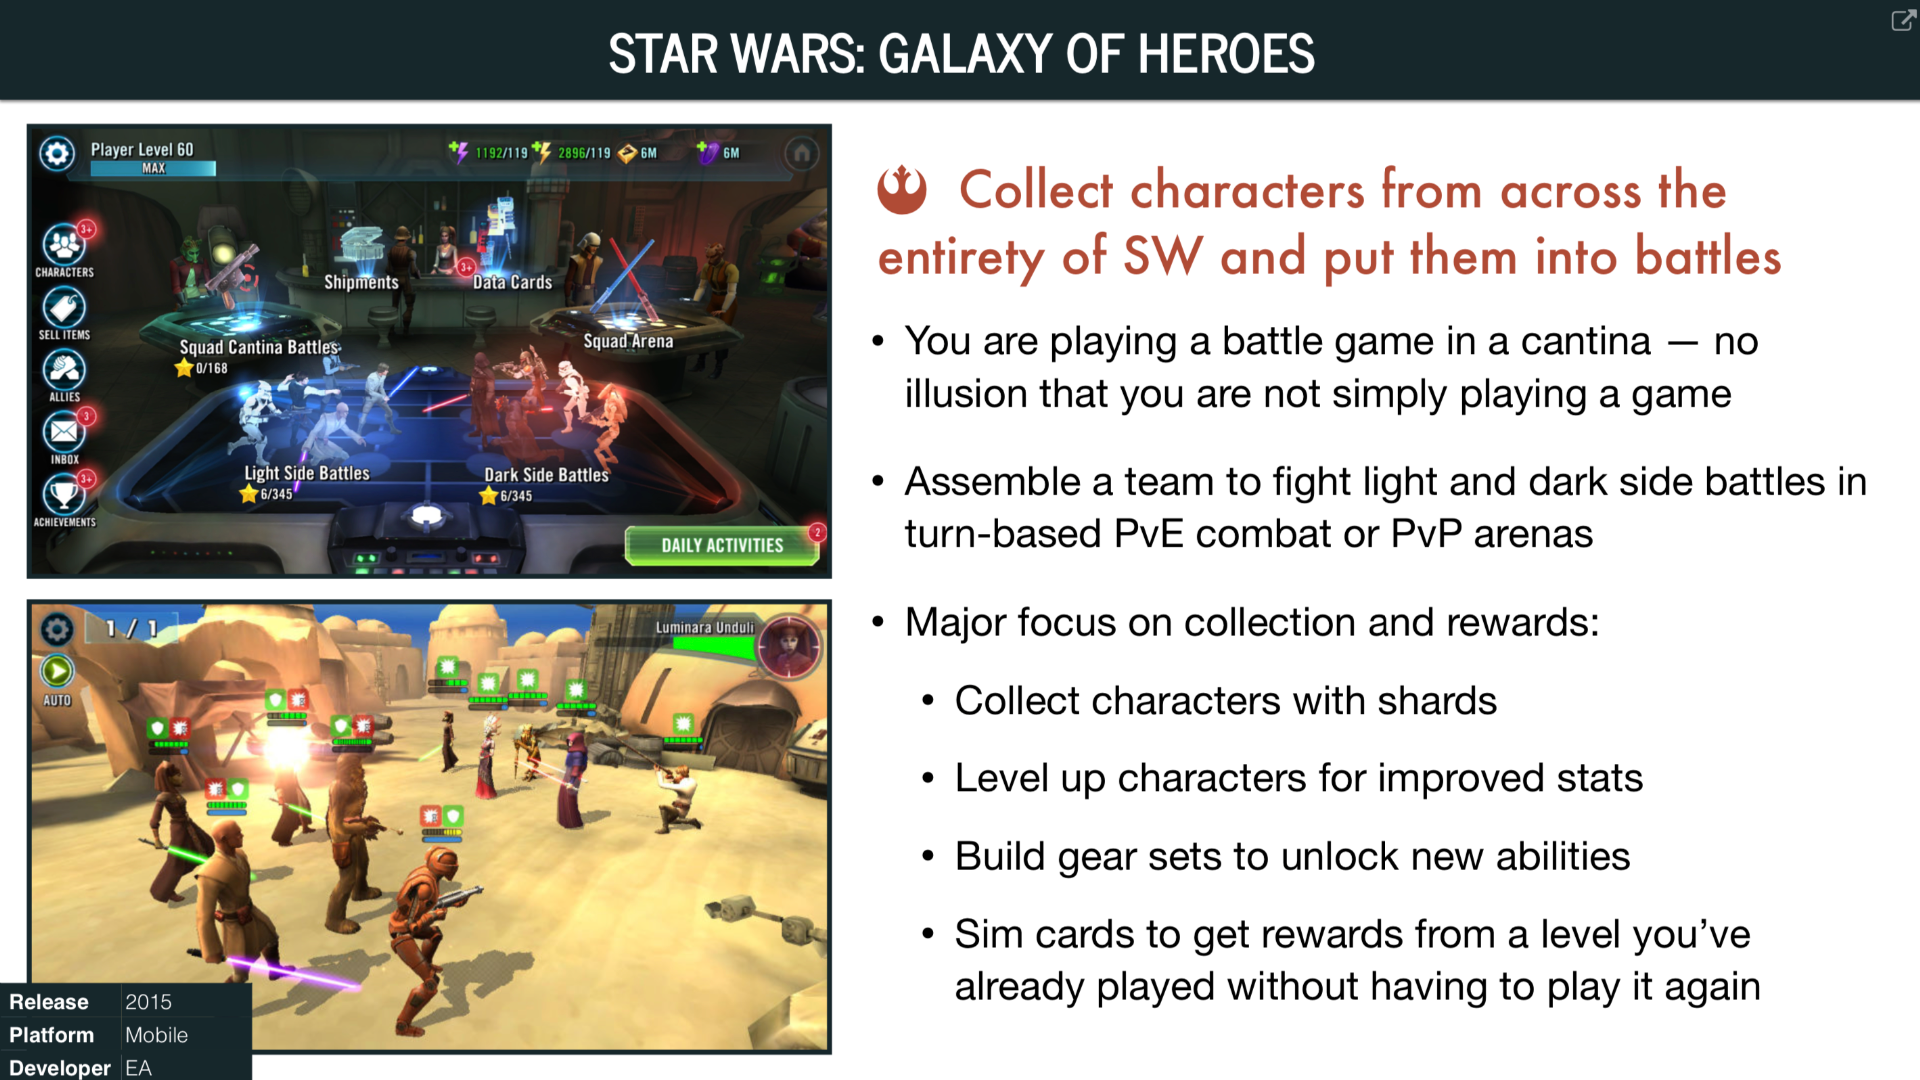 Overview of Star Wars: Galaxy of Heroes (2015)